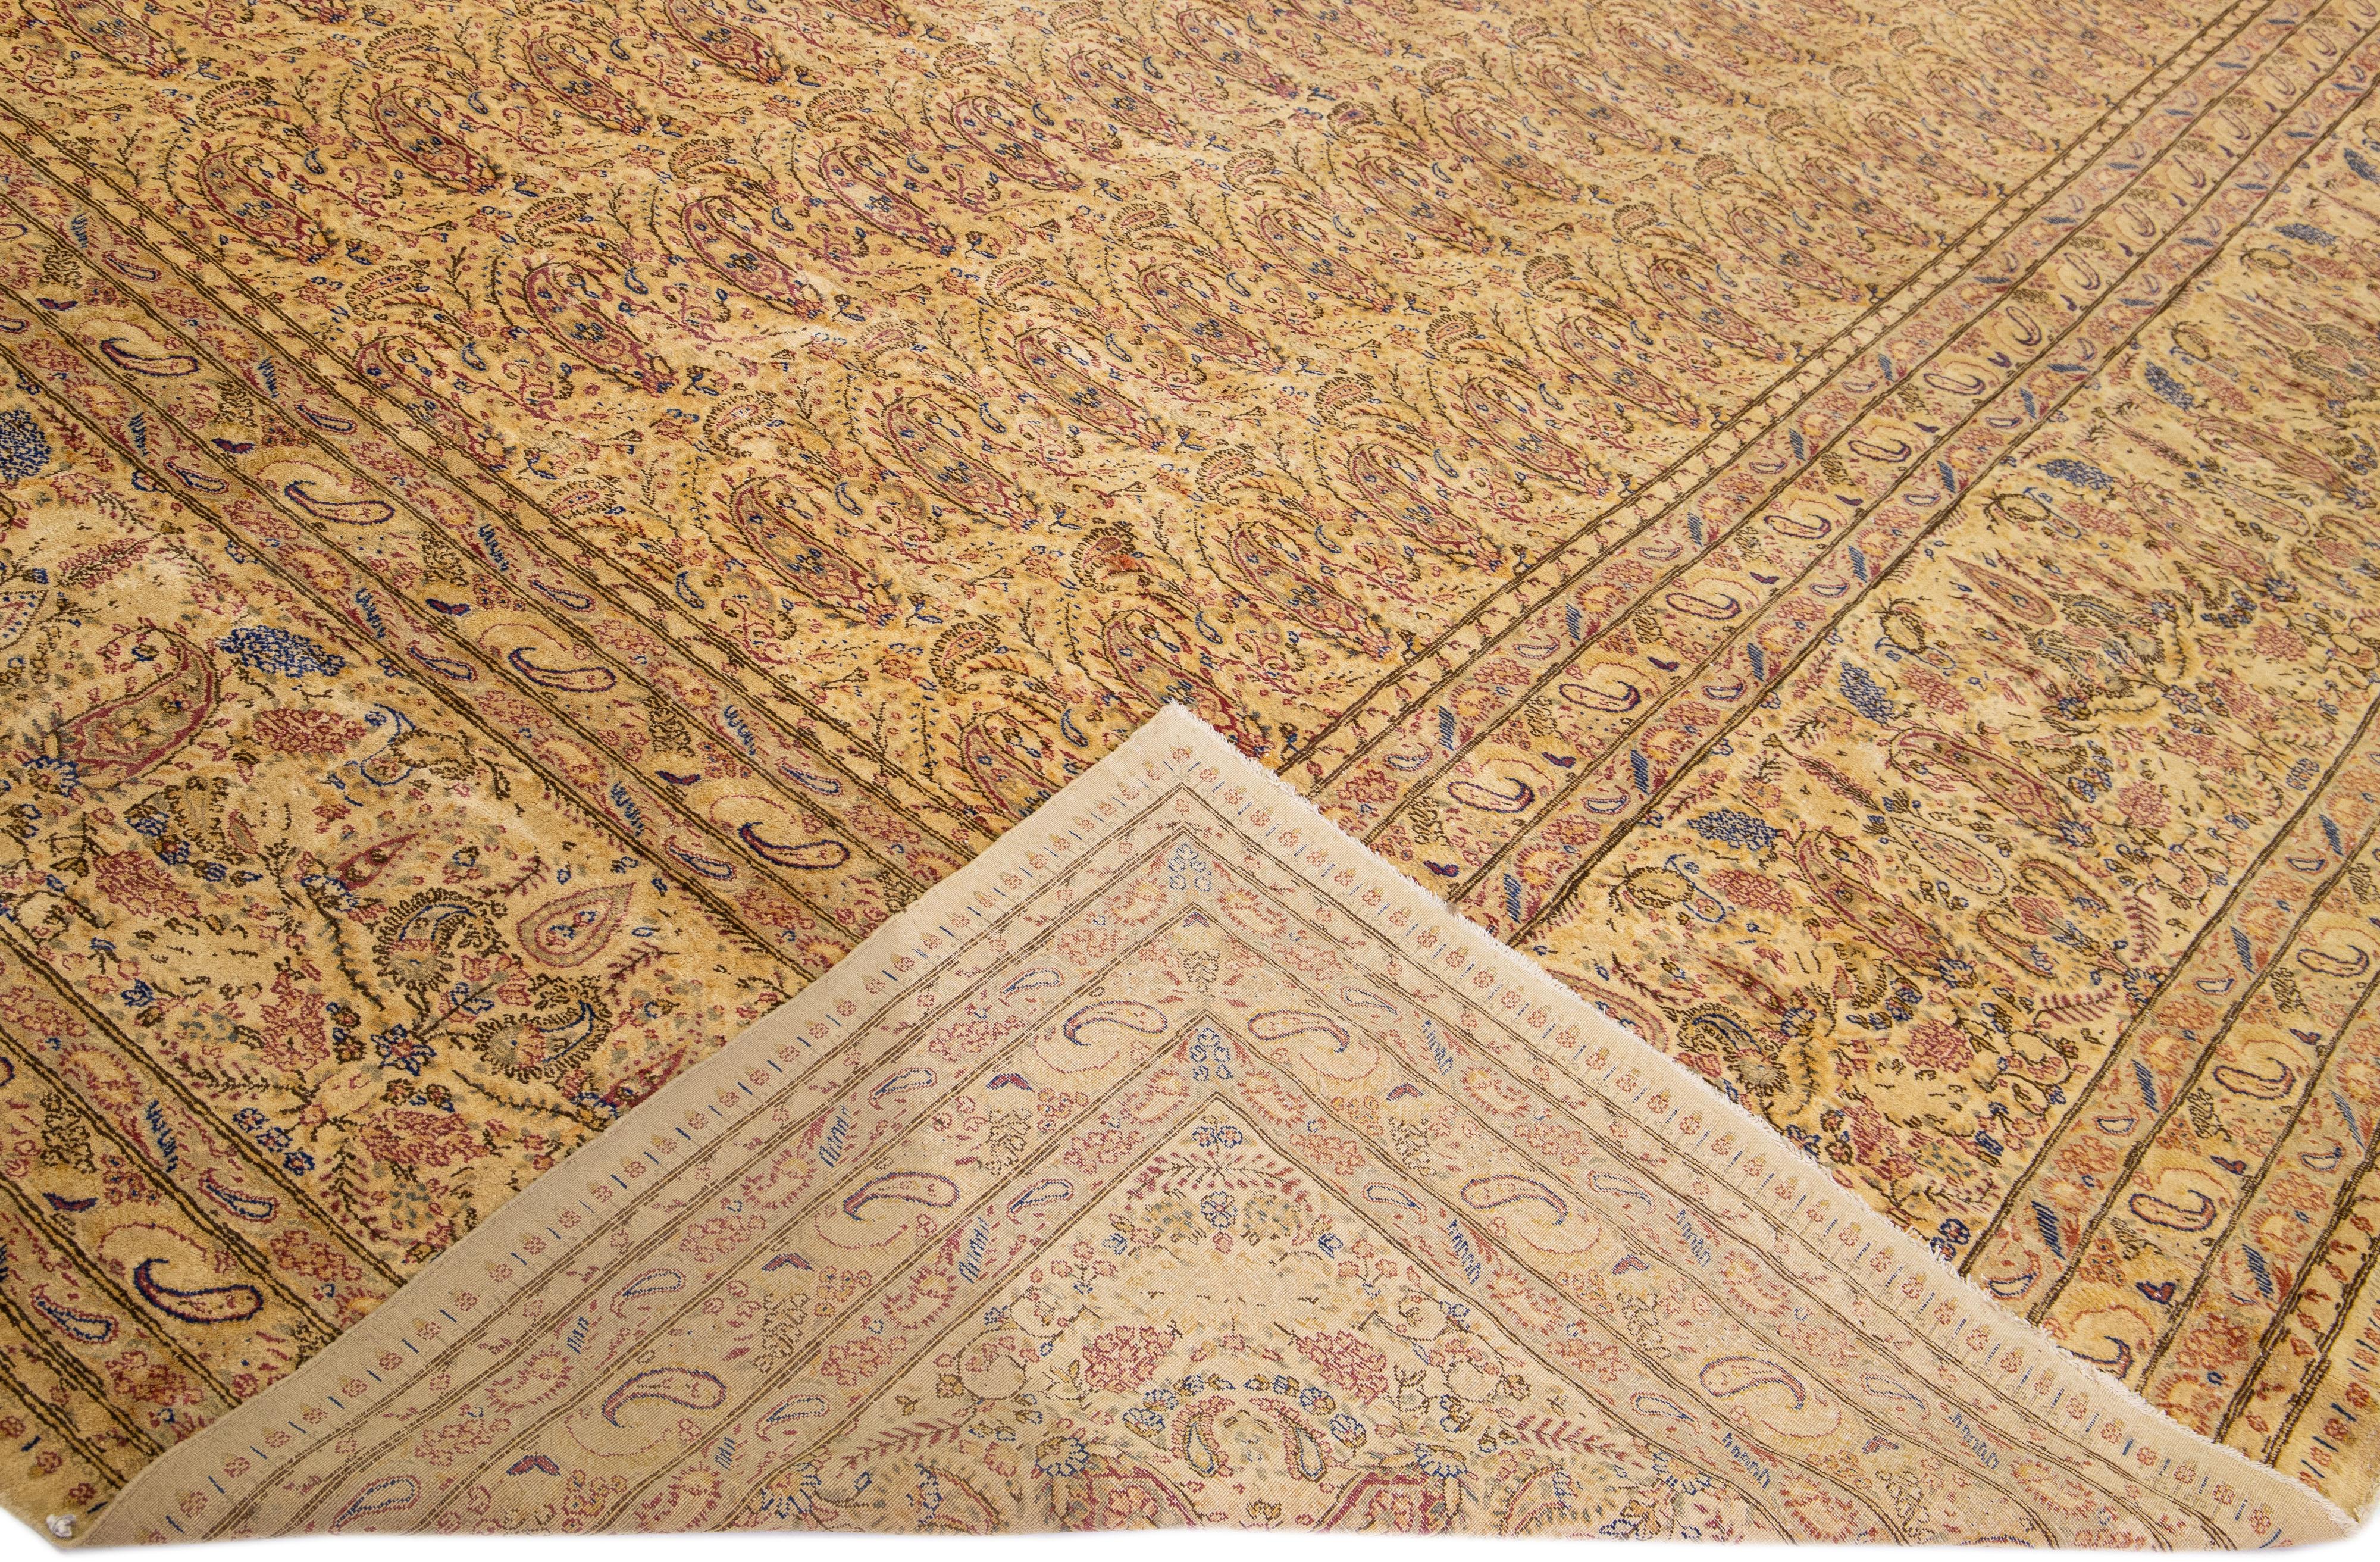 Beautiful antique Kerman hand-knotted wool rug with a tan field. This Persian rug has multicolor accents in a gorgeous all-over floral pattern design.

This rug measures: 16' x 20'8